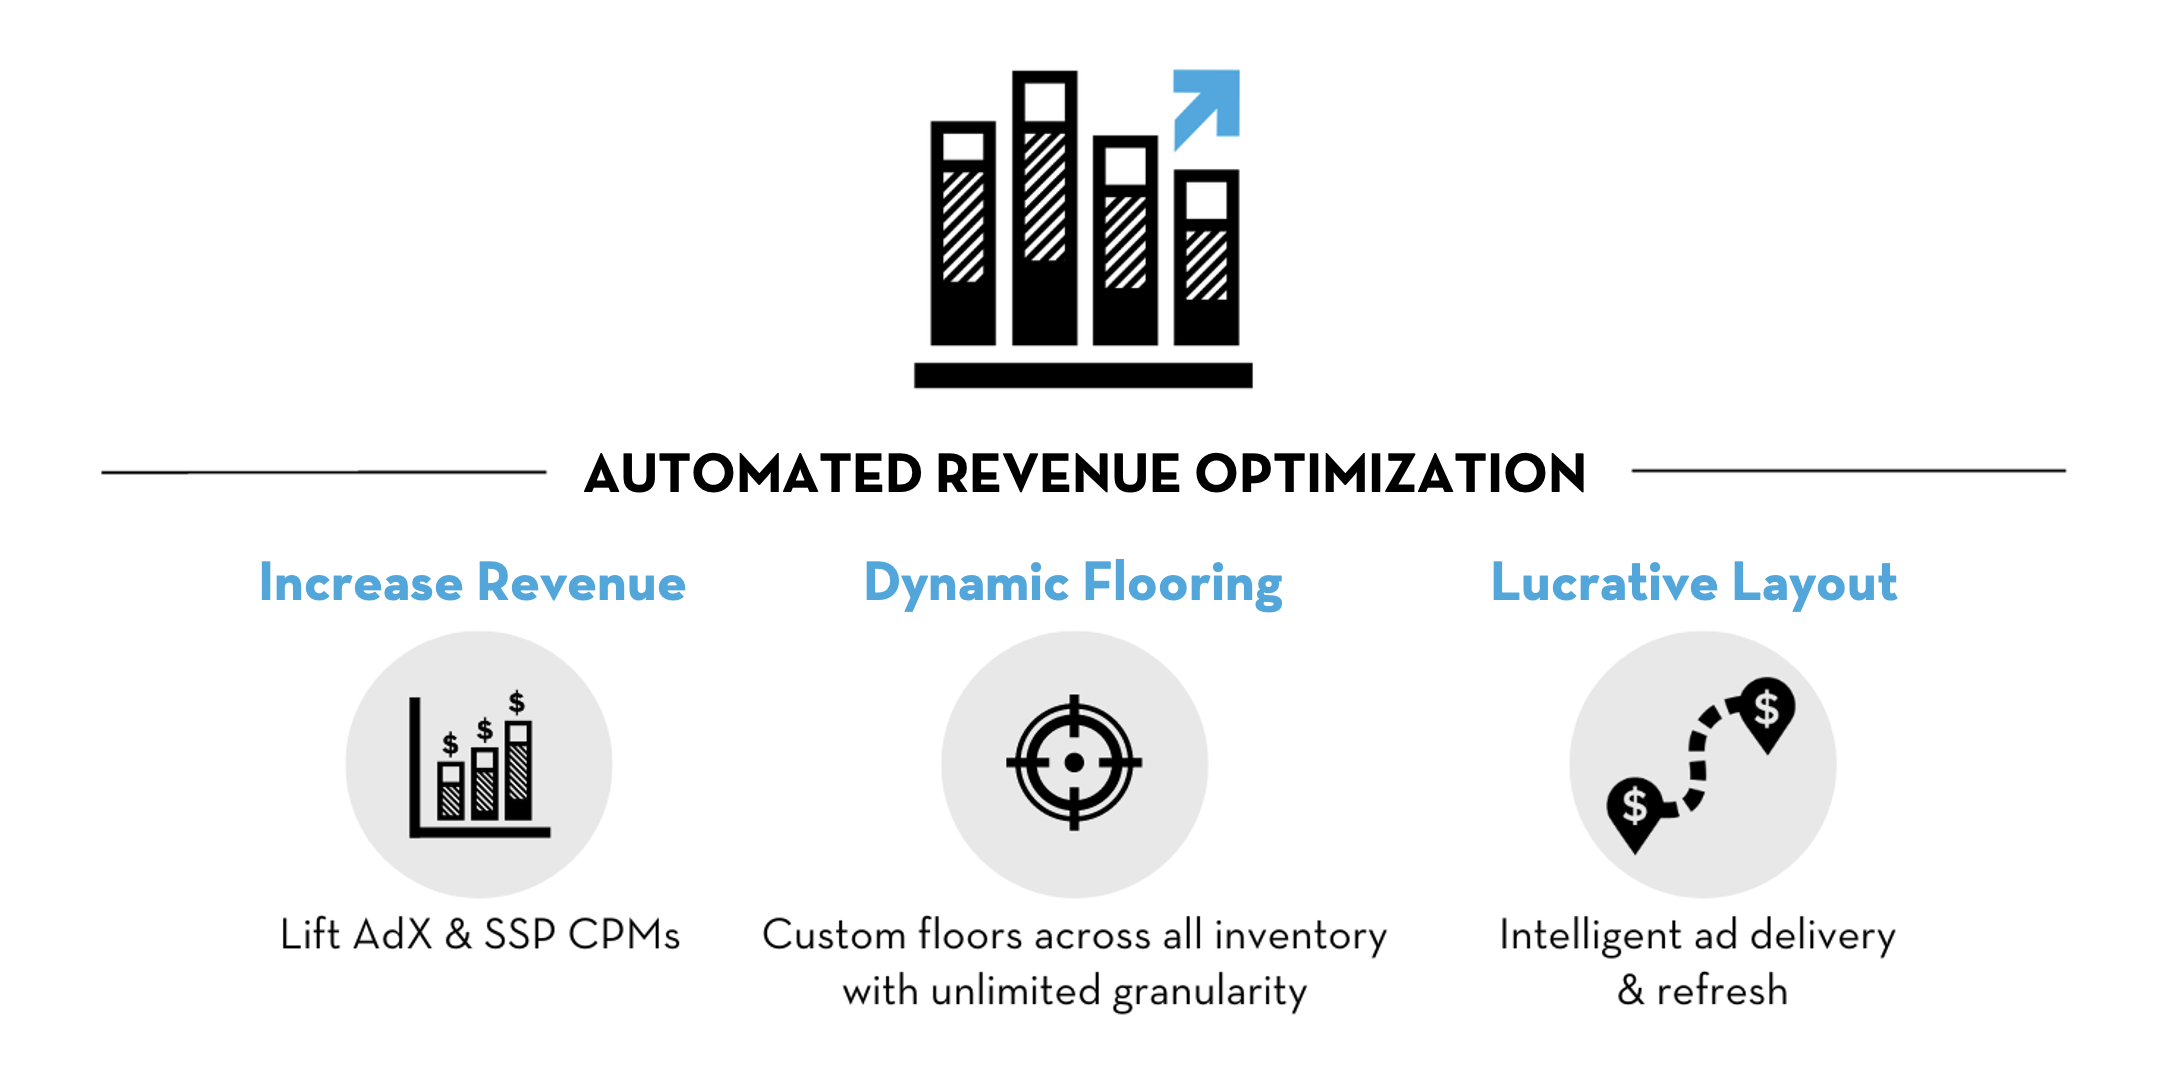 Automated Revenue Optimzation. 1. Increase Revenue: Lift AdX & SSP CPMs 2. Dynamic Flooring: Custom floors across all inventory with unlimited granularity 3. Lucrative Layout: Intelligent ad delivery & refresh.